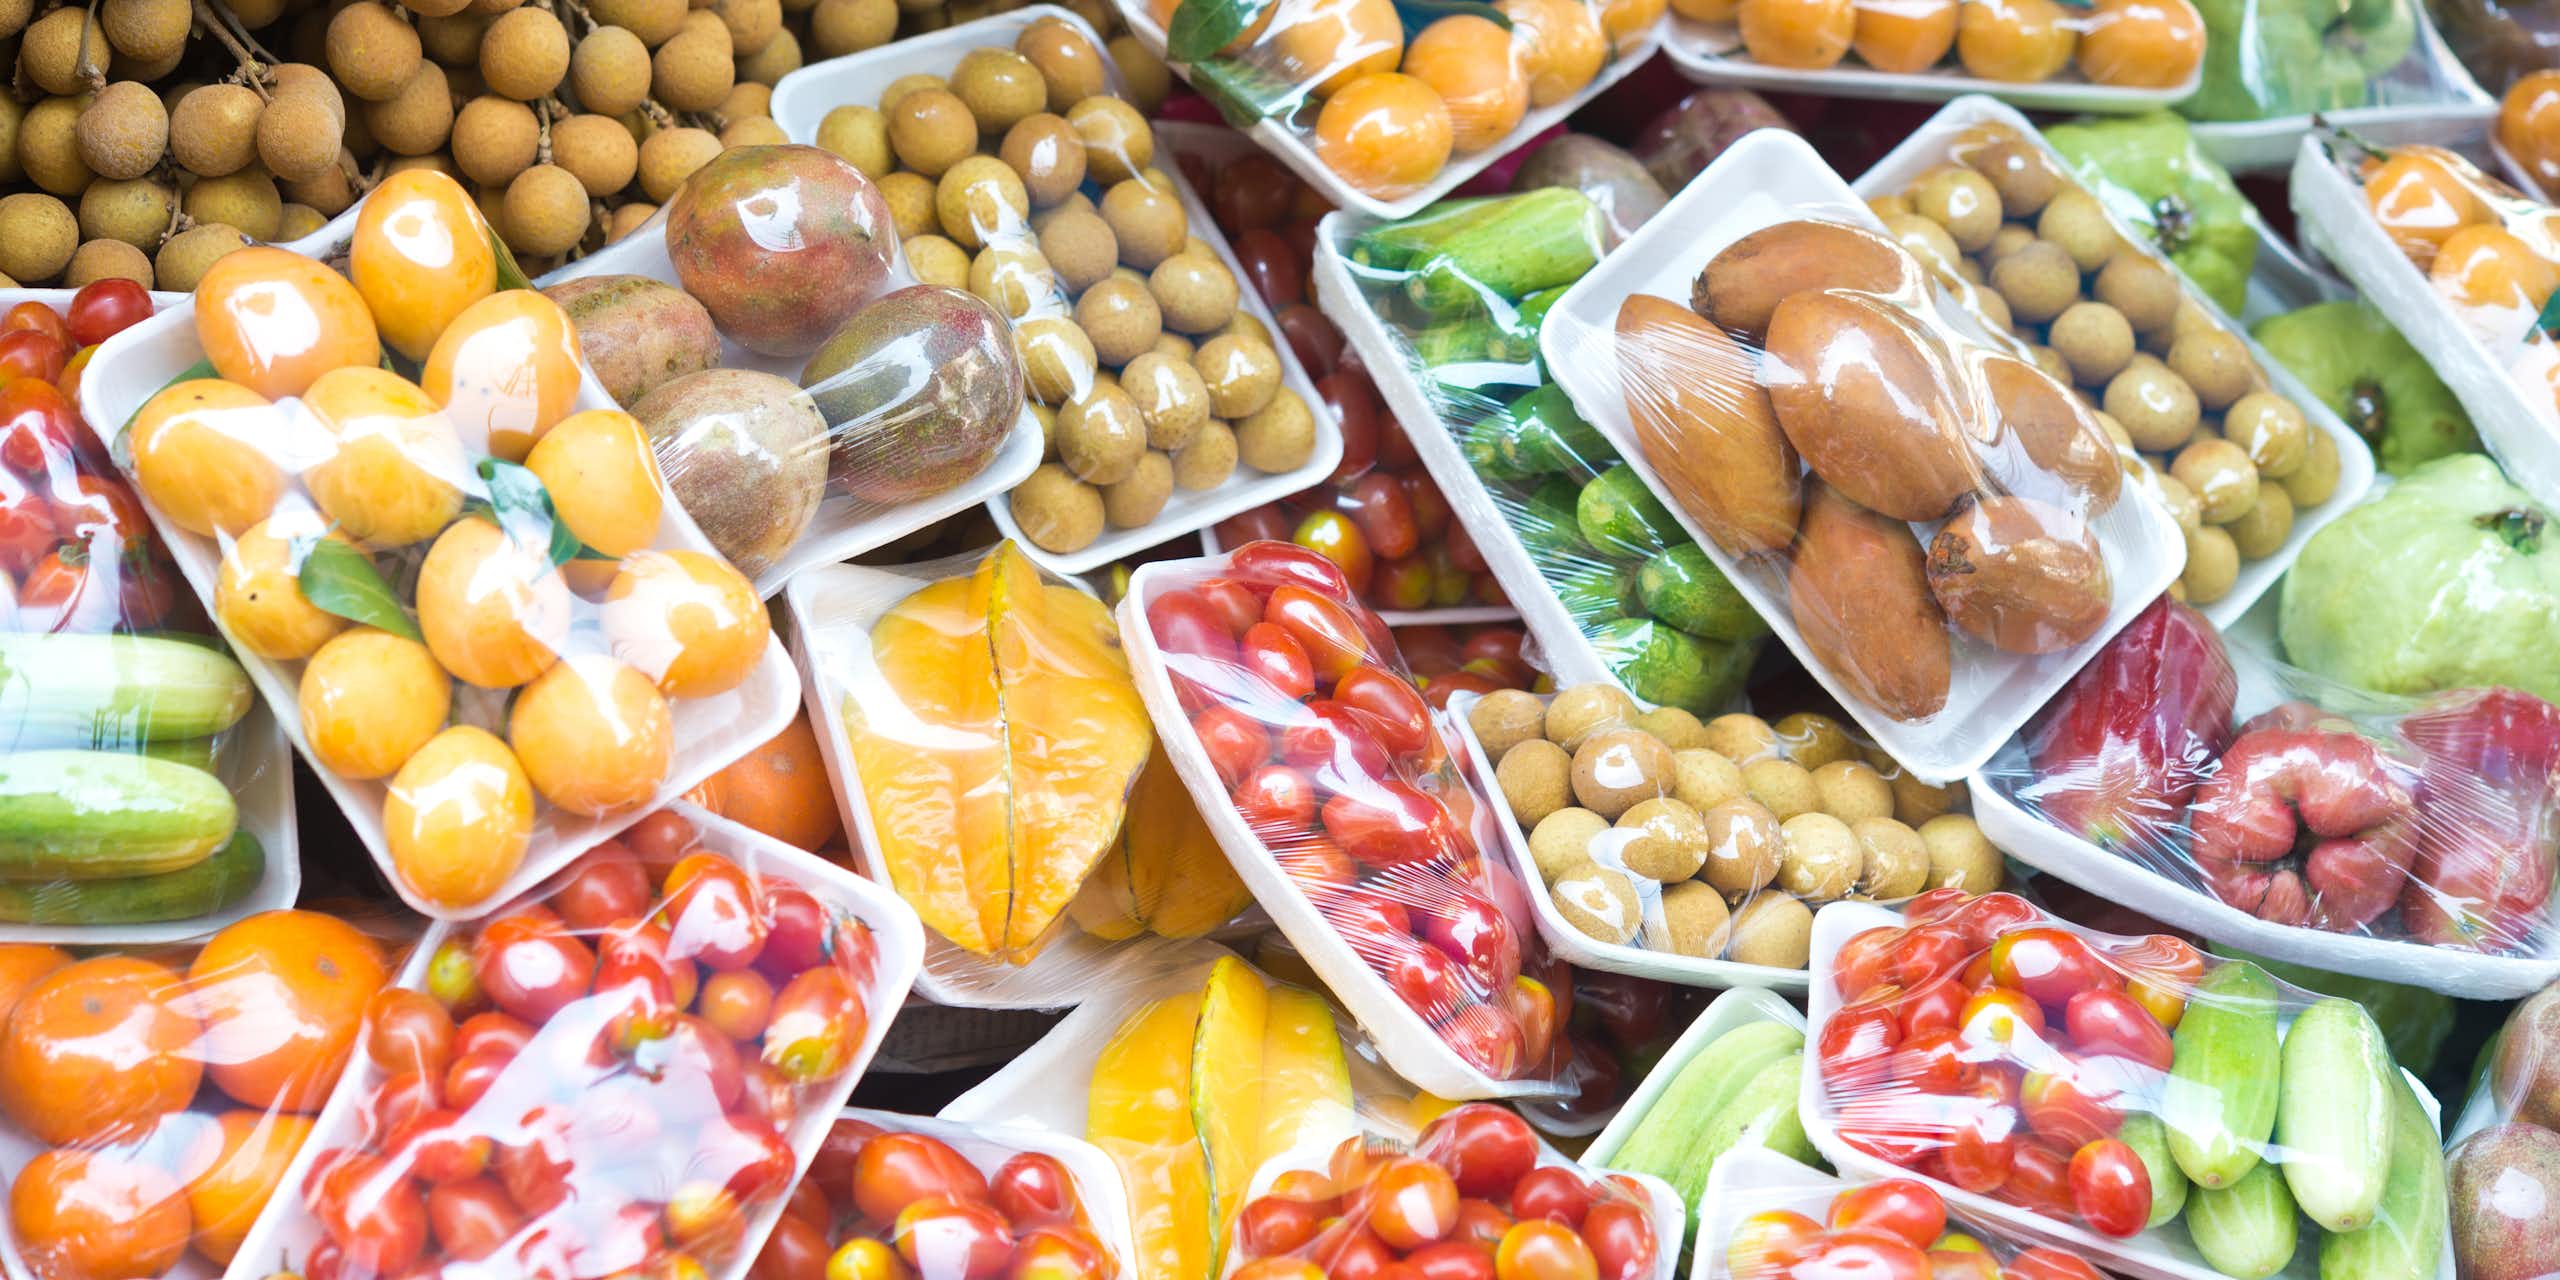 A variety of fruits and vegetables in plastic packing